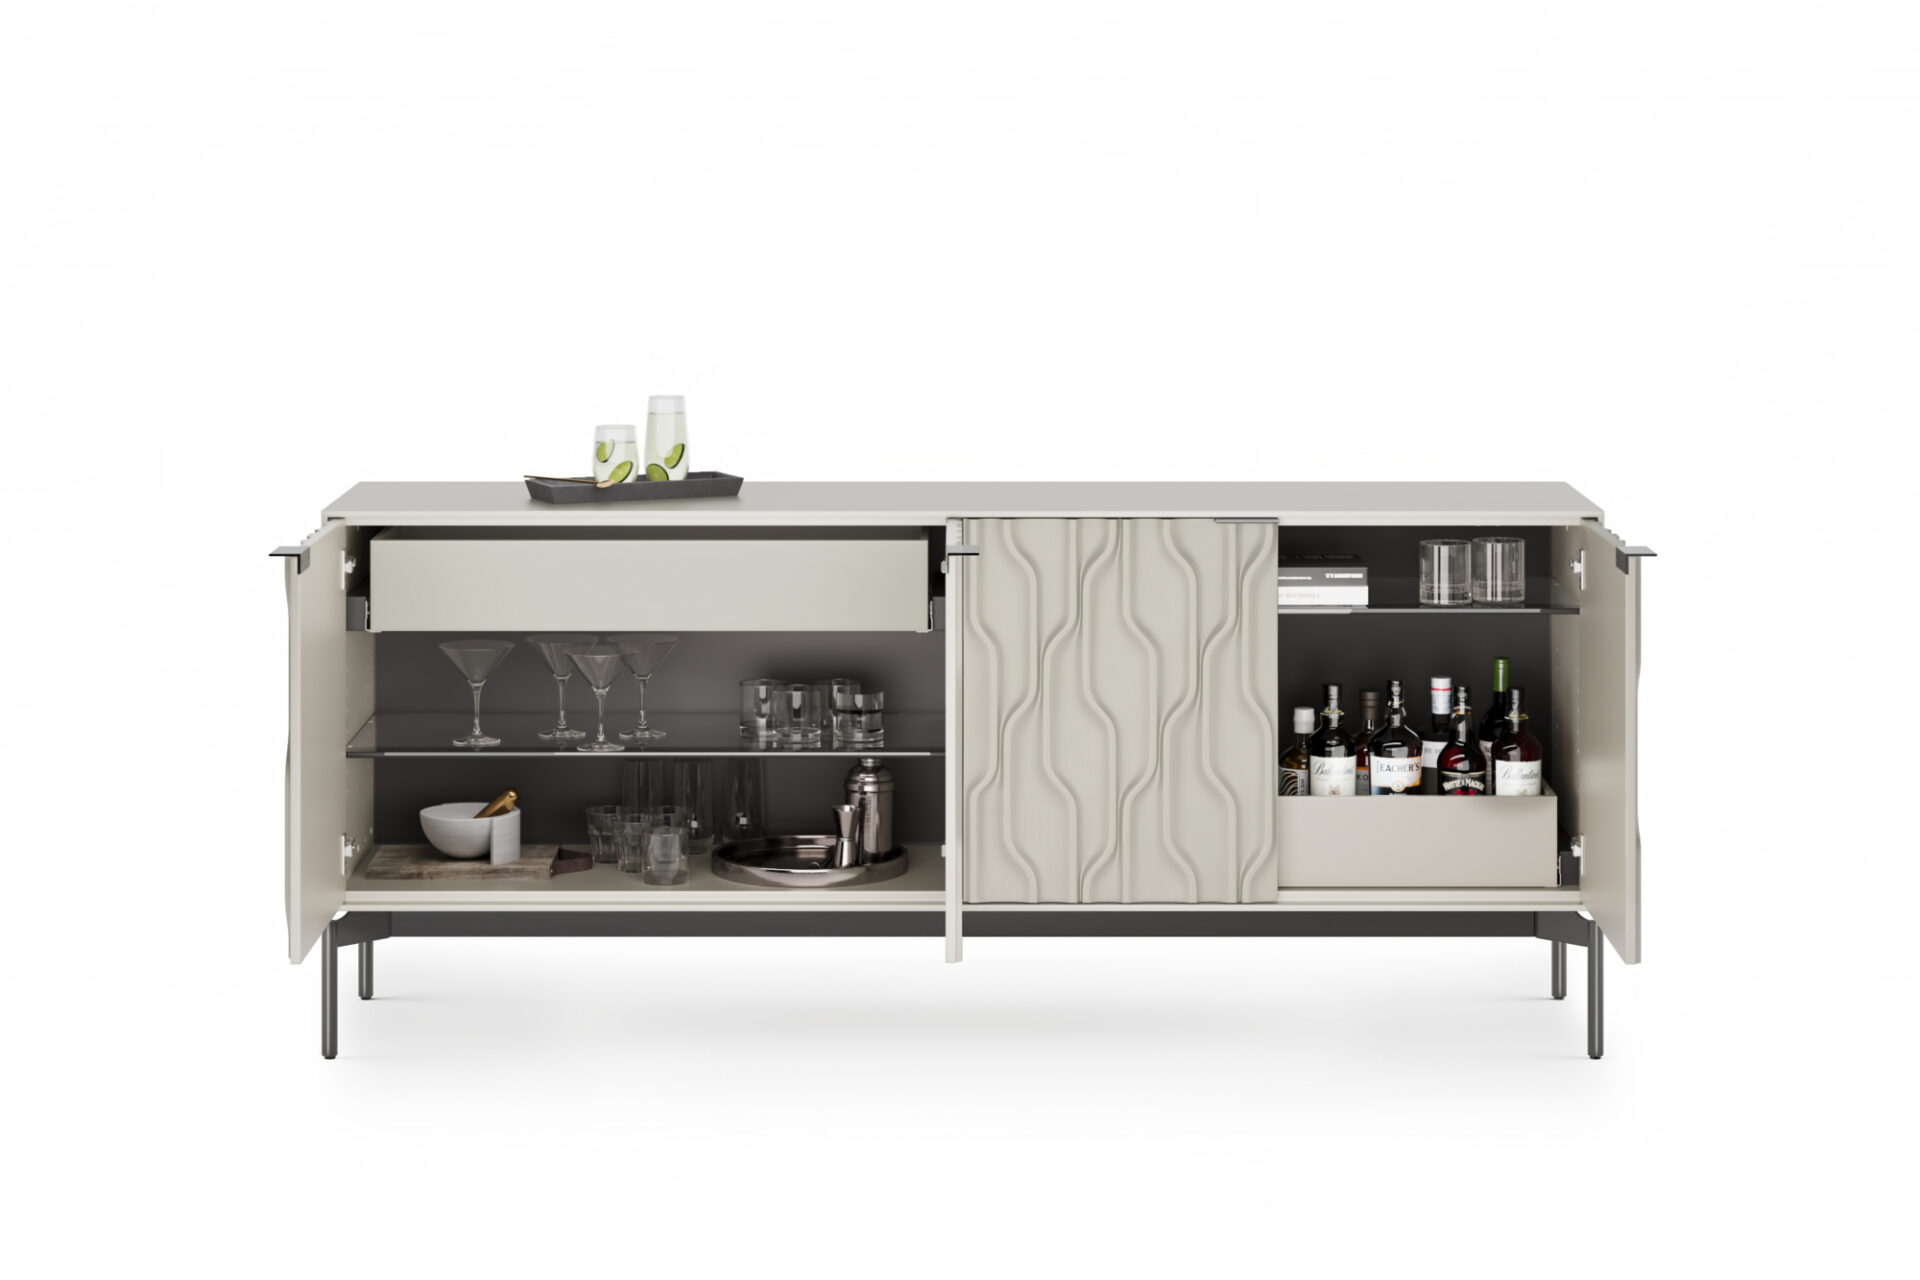 mesa-credenza-7639-BDI-stone-brushed-carbon-contemporary-storage-cabinet-detail-bar-05